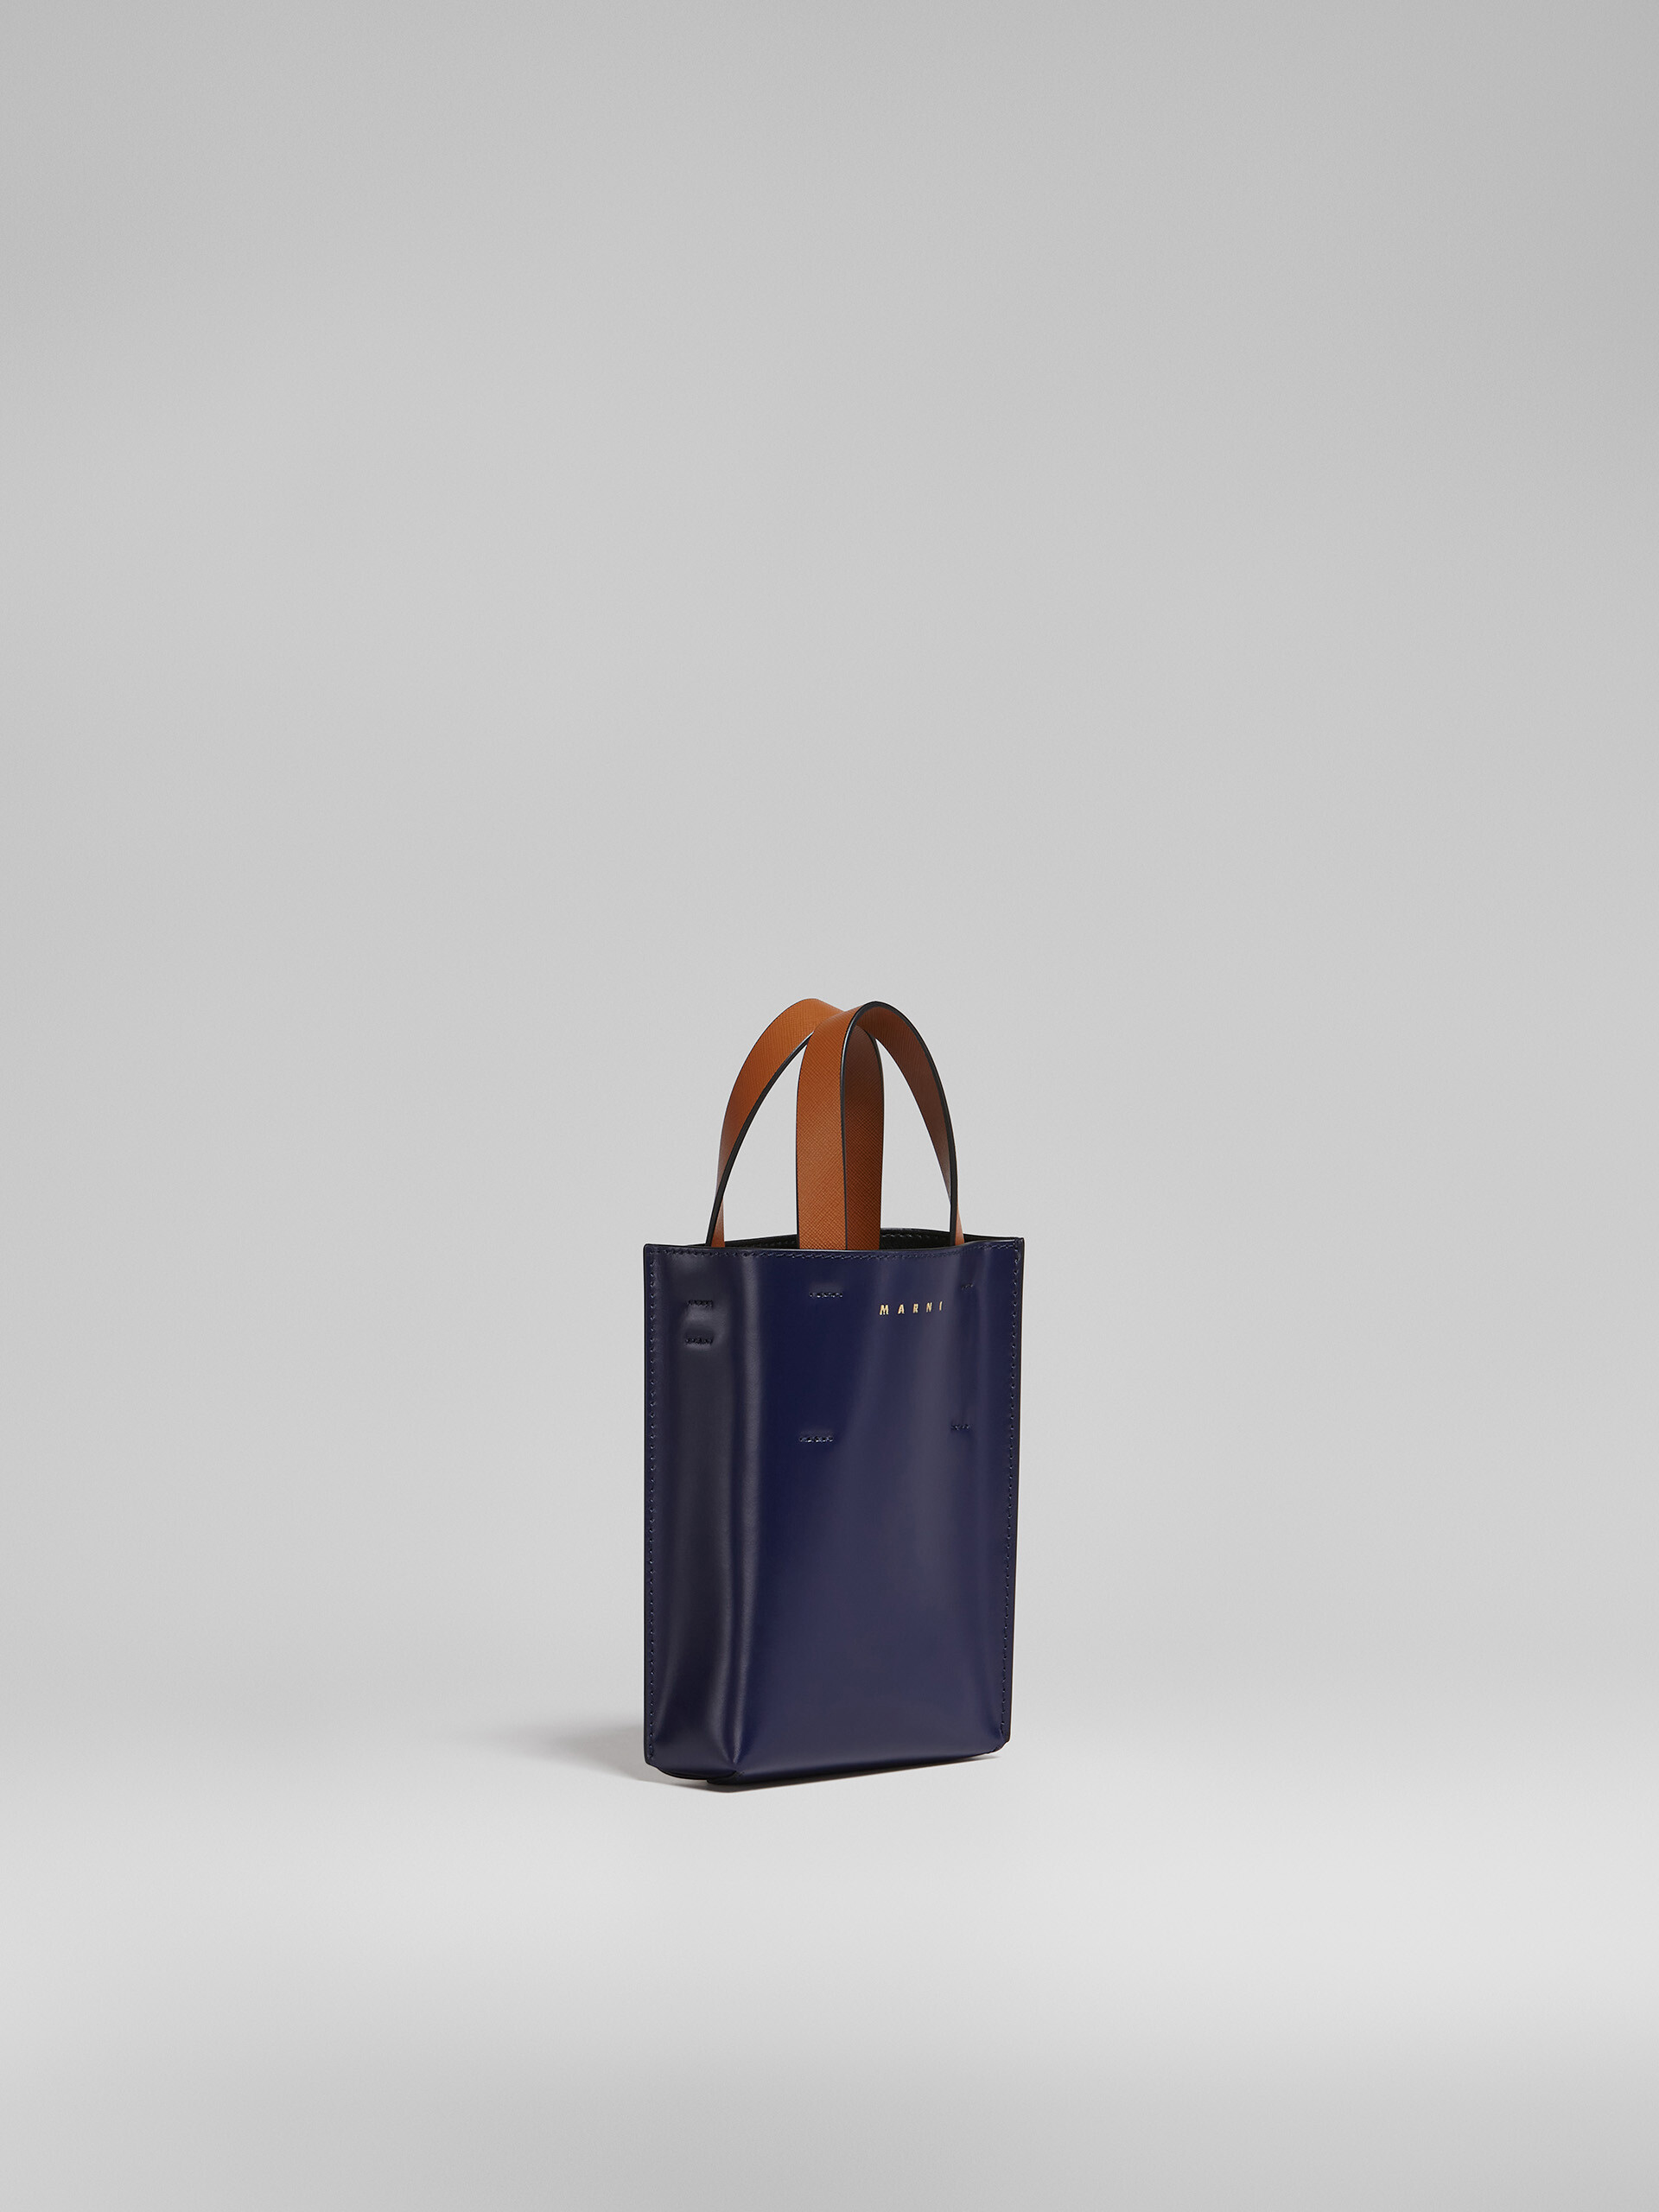 MUSEO nano bag in blue and white leather - Shopping Bags - Image 6